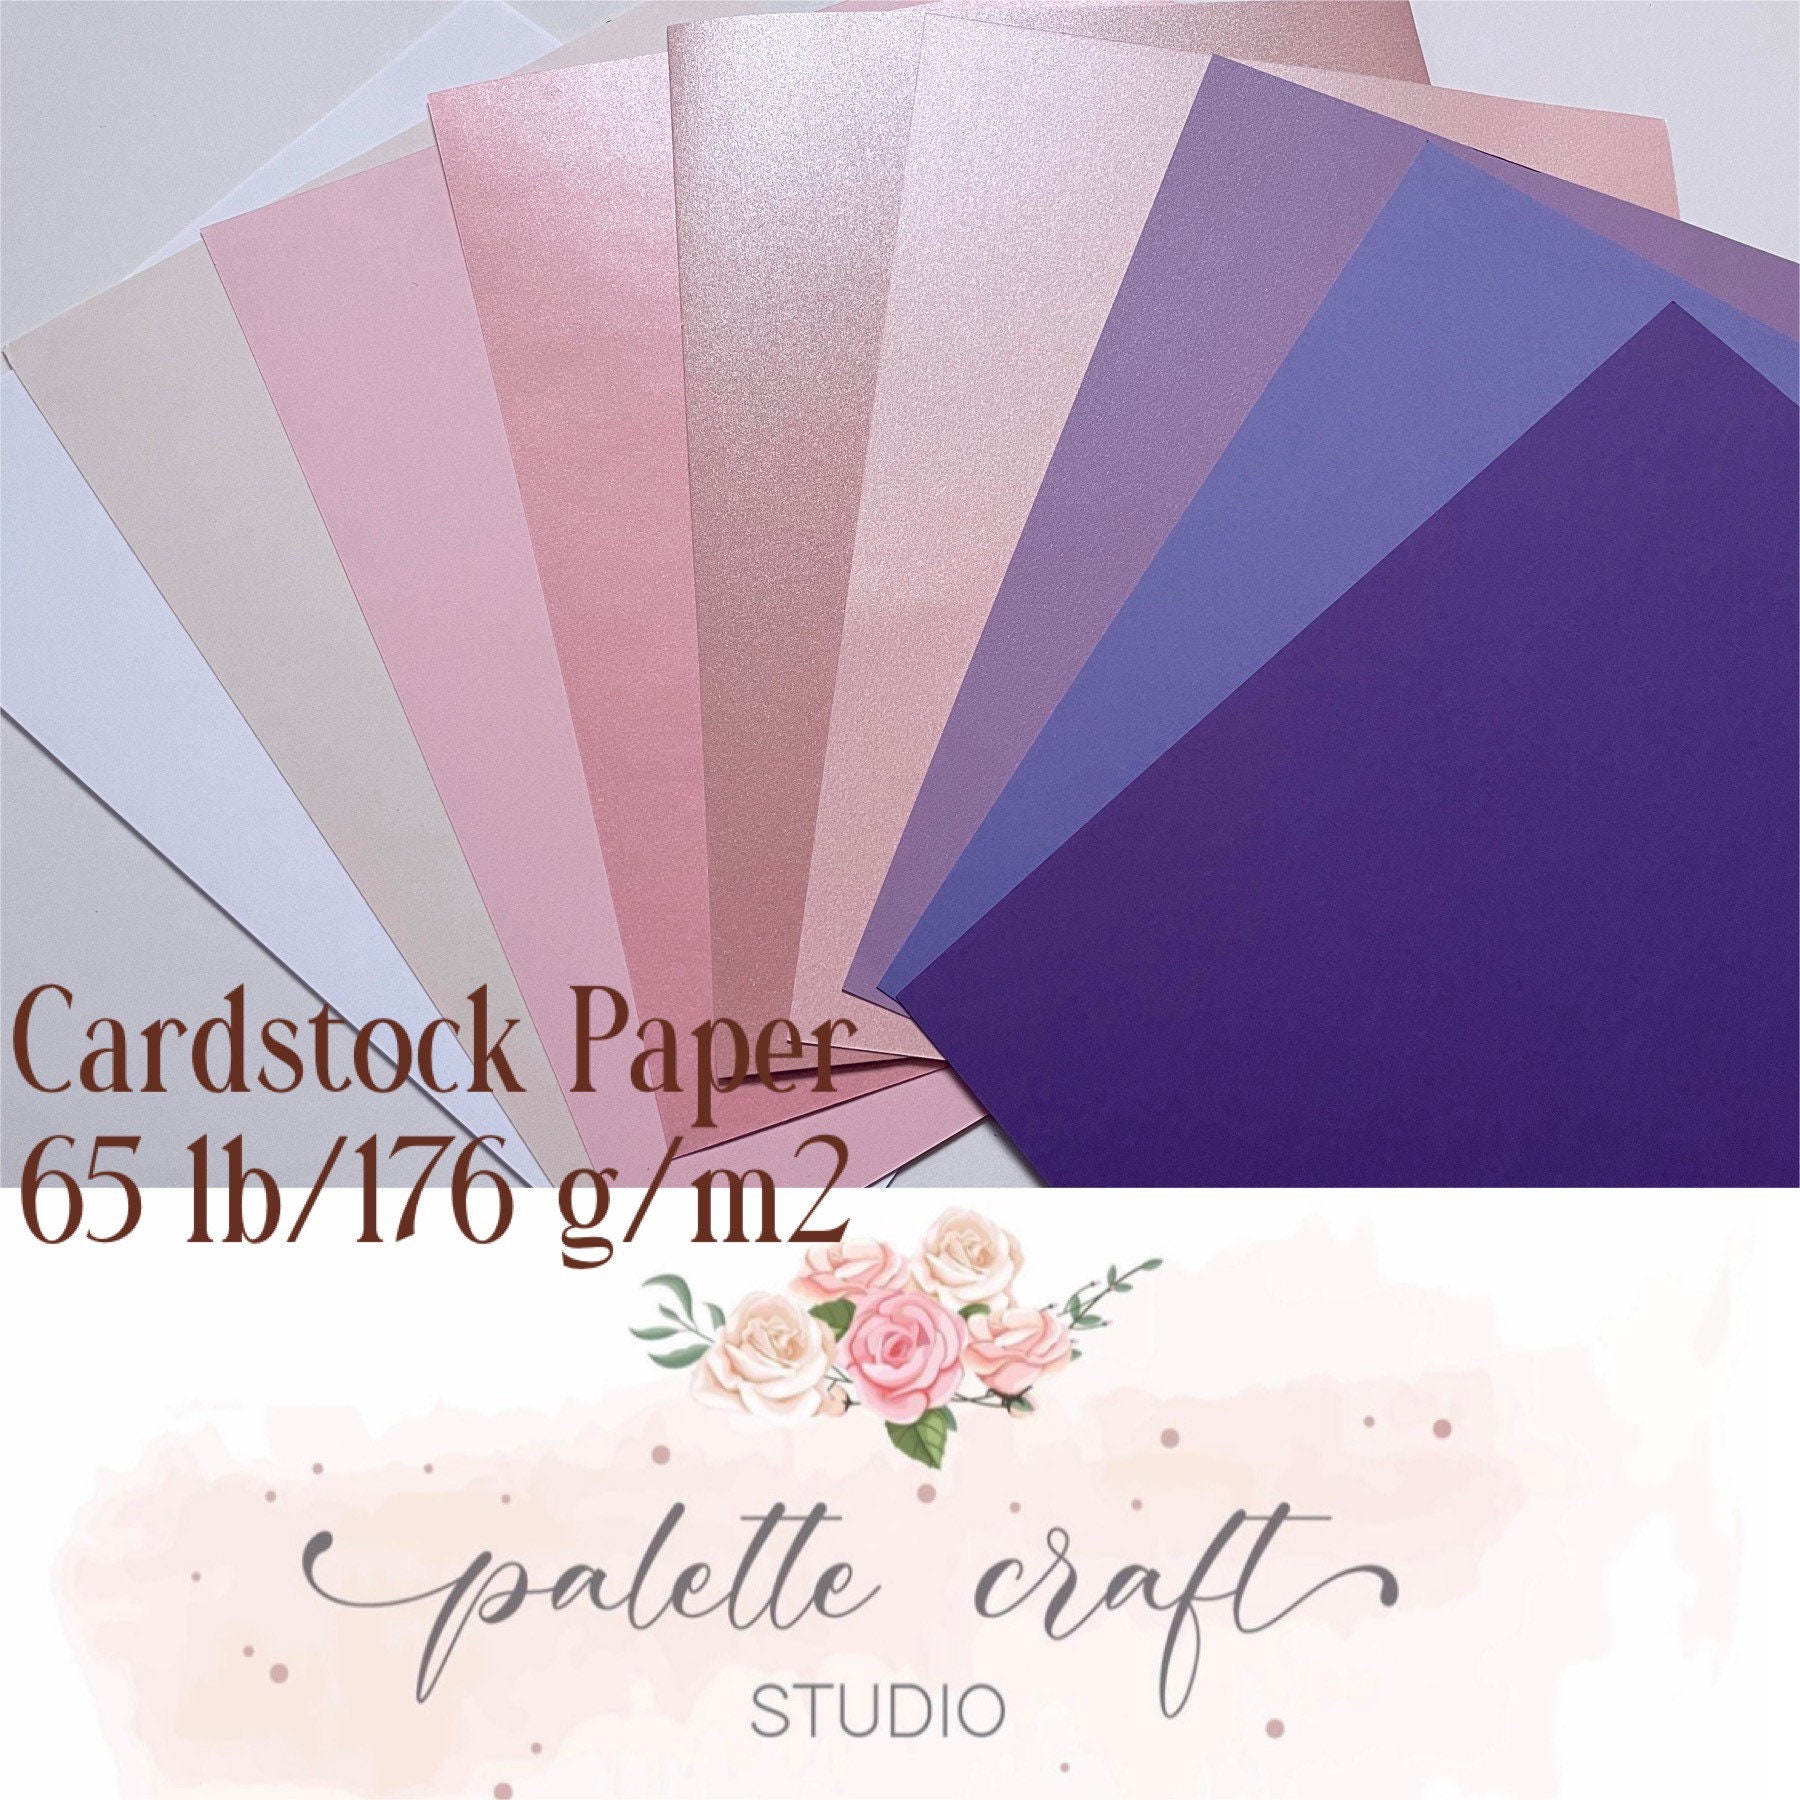 Premium Cardstock Paper 65 Lb 8.5 X 11 In. Perfect for Scrapbooking,  Cardmaking, & More Pick Color and Quantity -  Israel